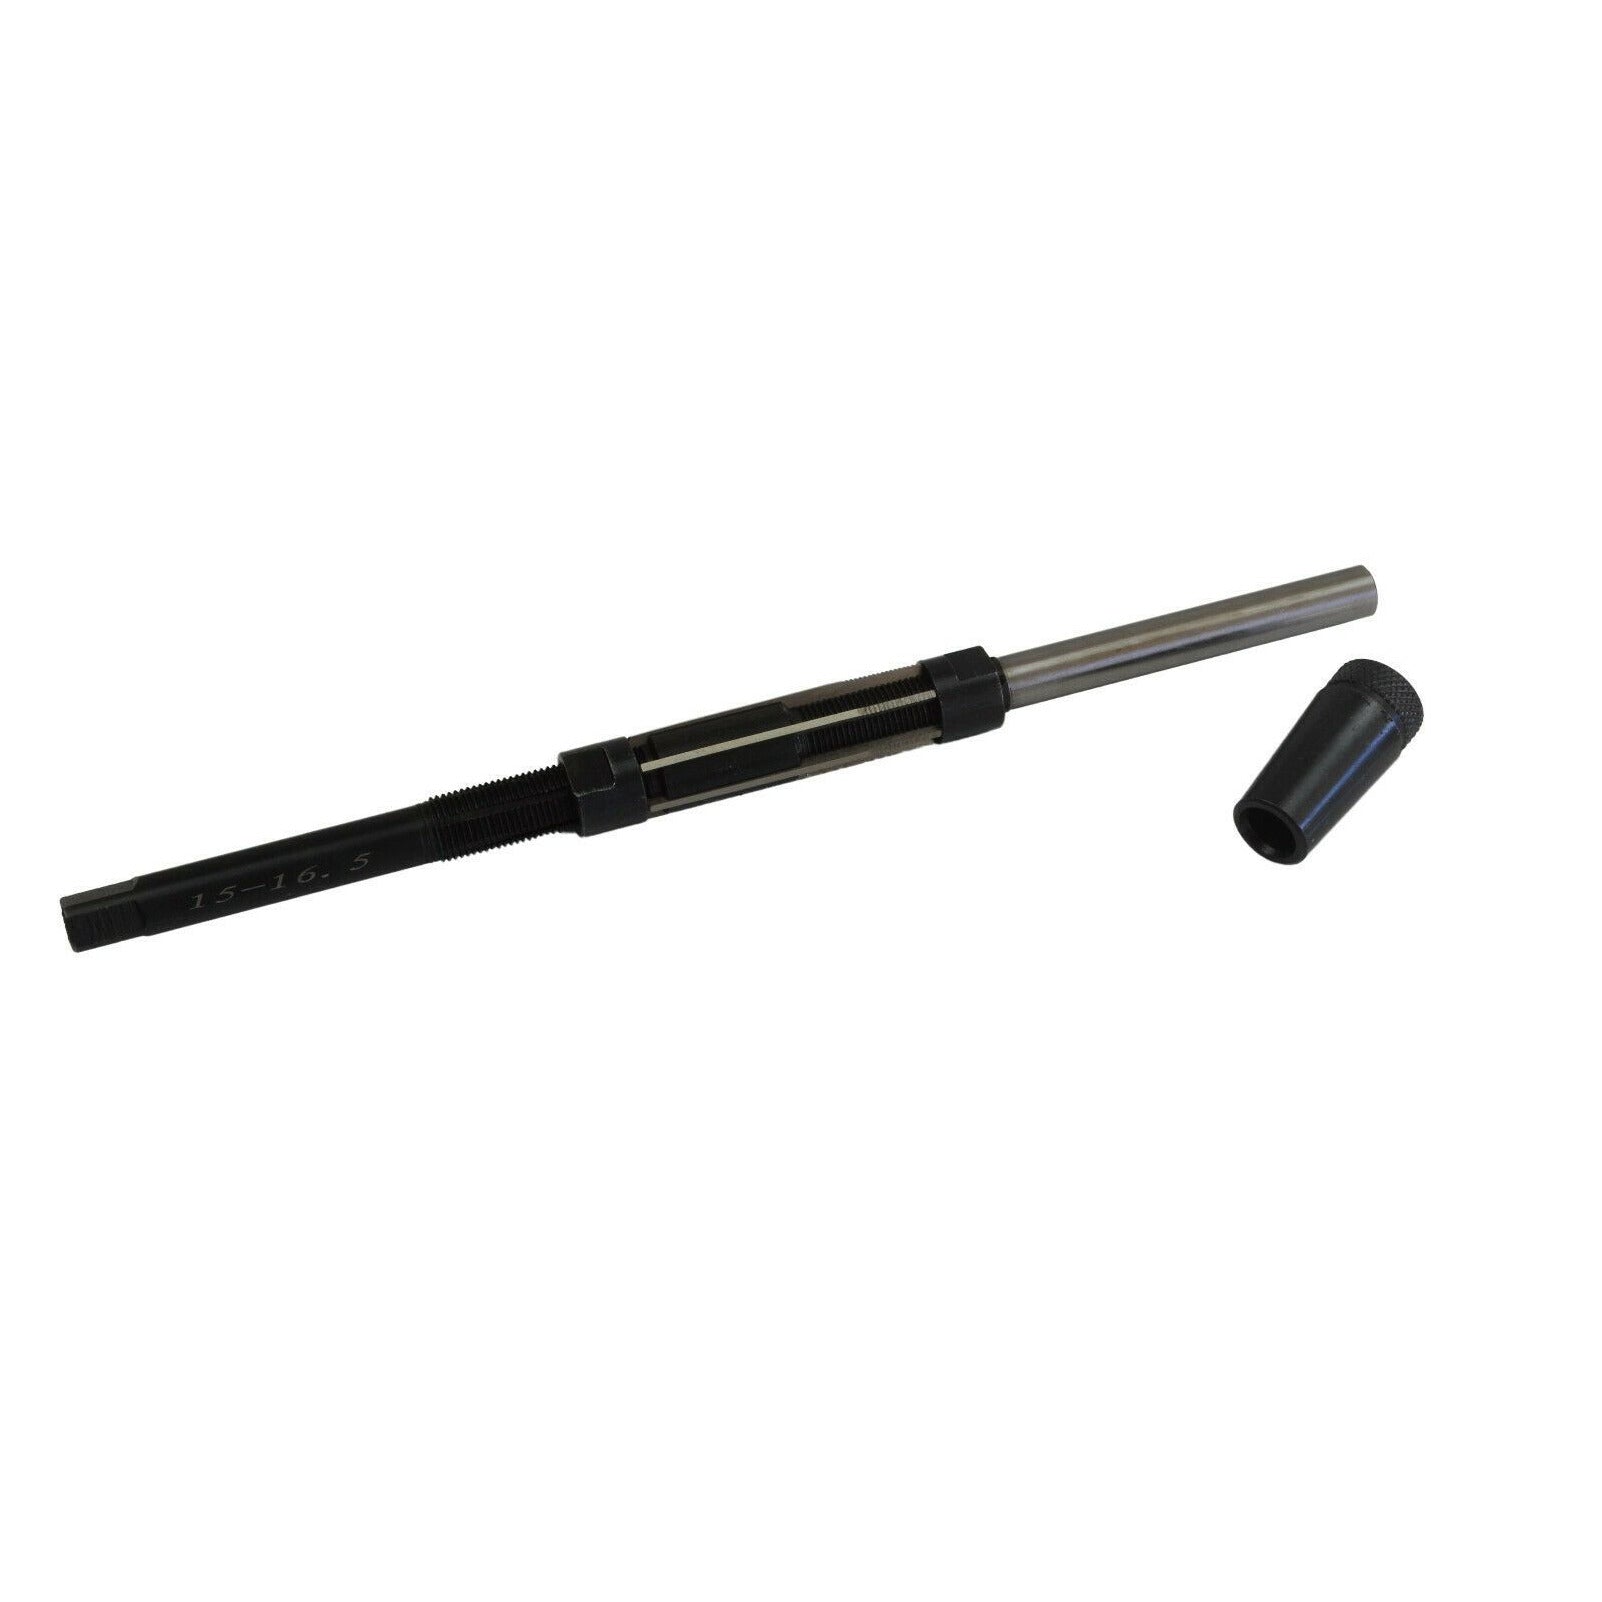 15 - 16.5mm Adjustable Hand Reamer with Guide